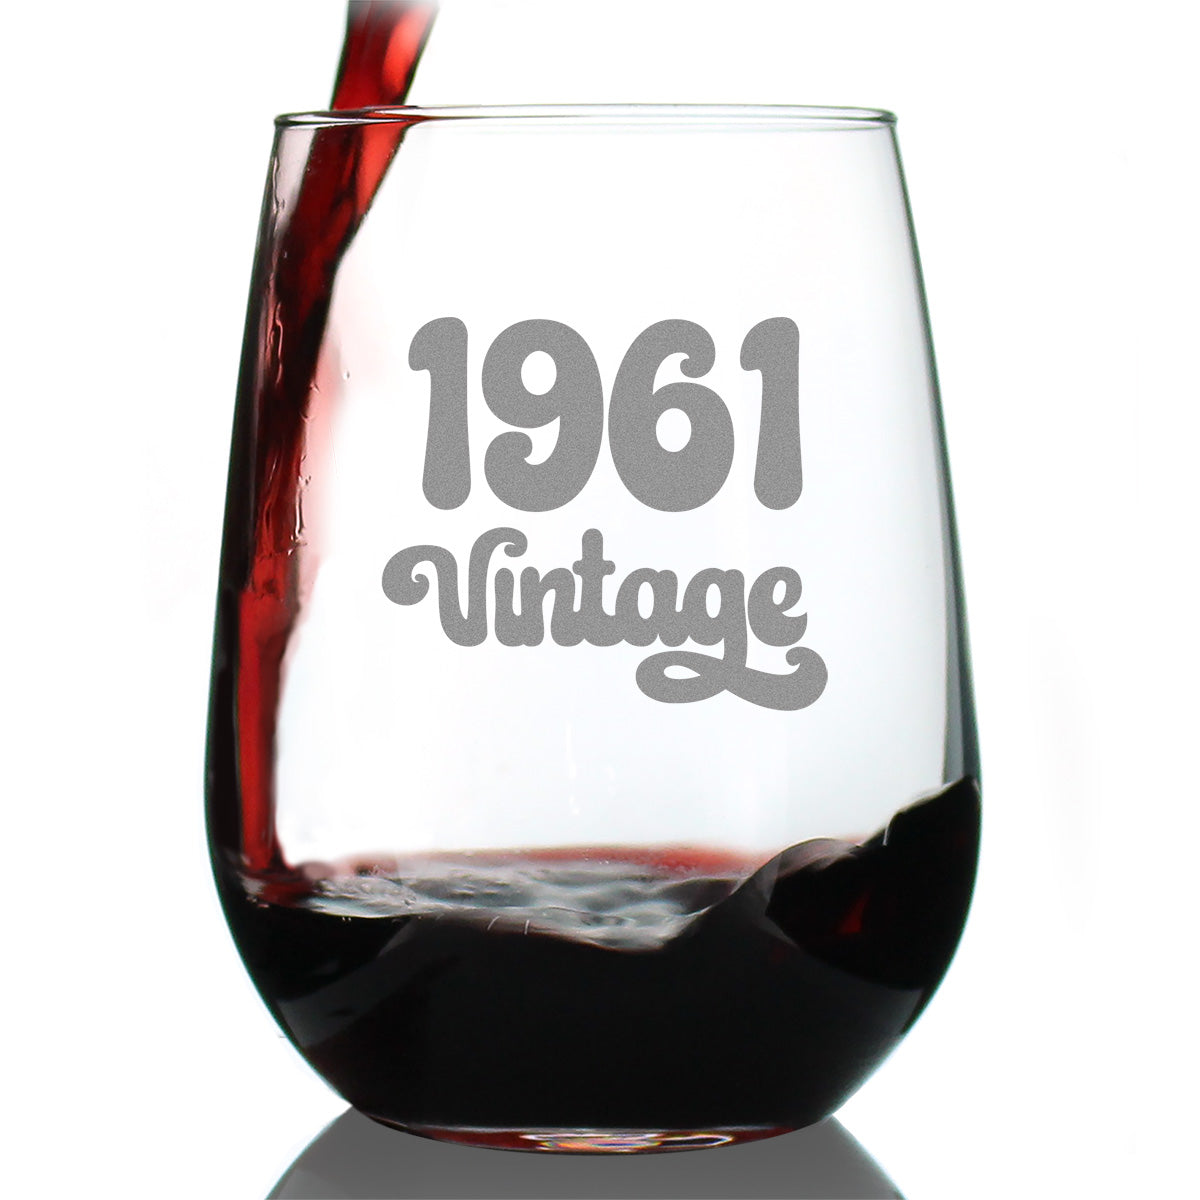 Vintage 1961 - 63rd Birthday Stemless Wine Glass Gifts for Women &amp; Men Turning 63 - Bday Party Decor - Large Glasses